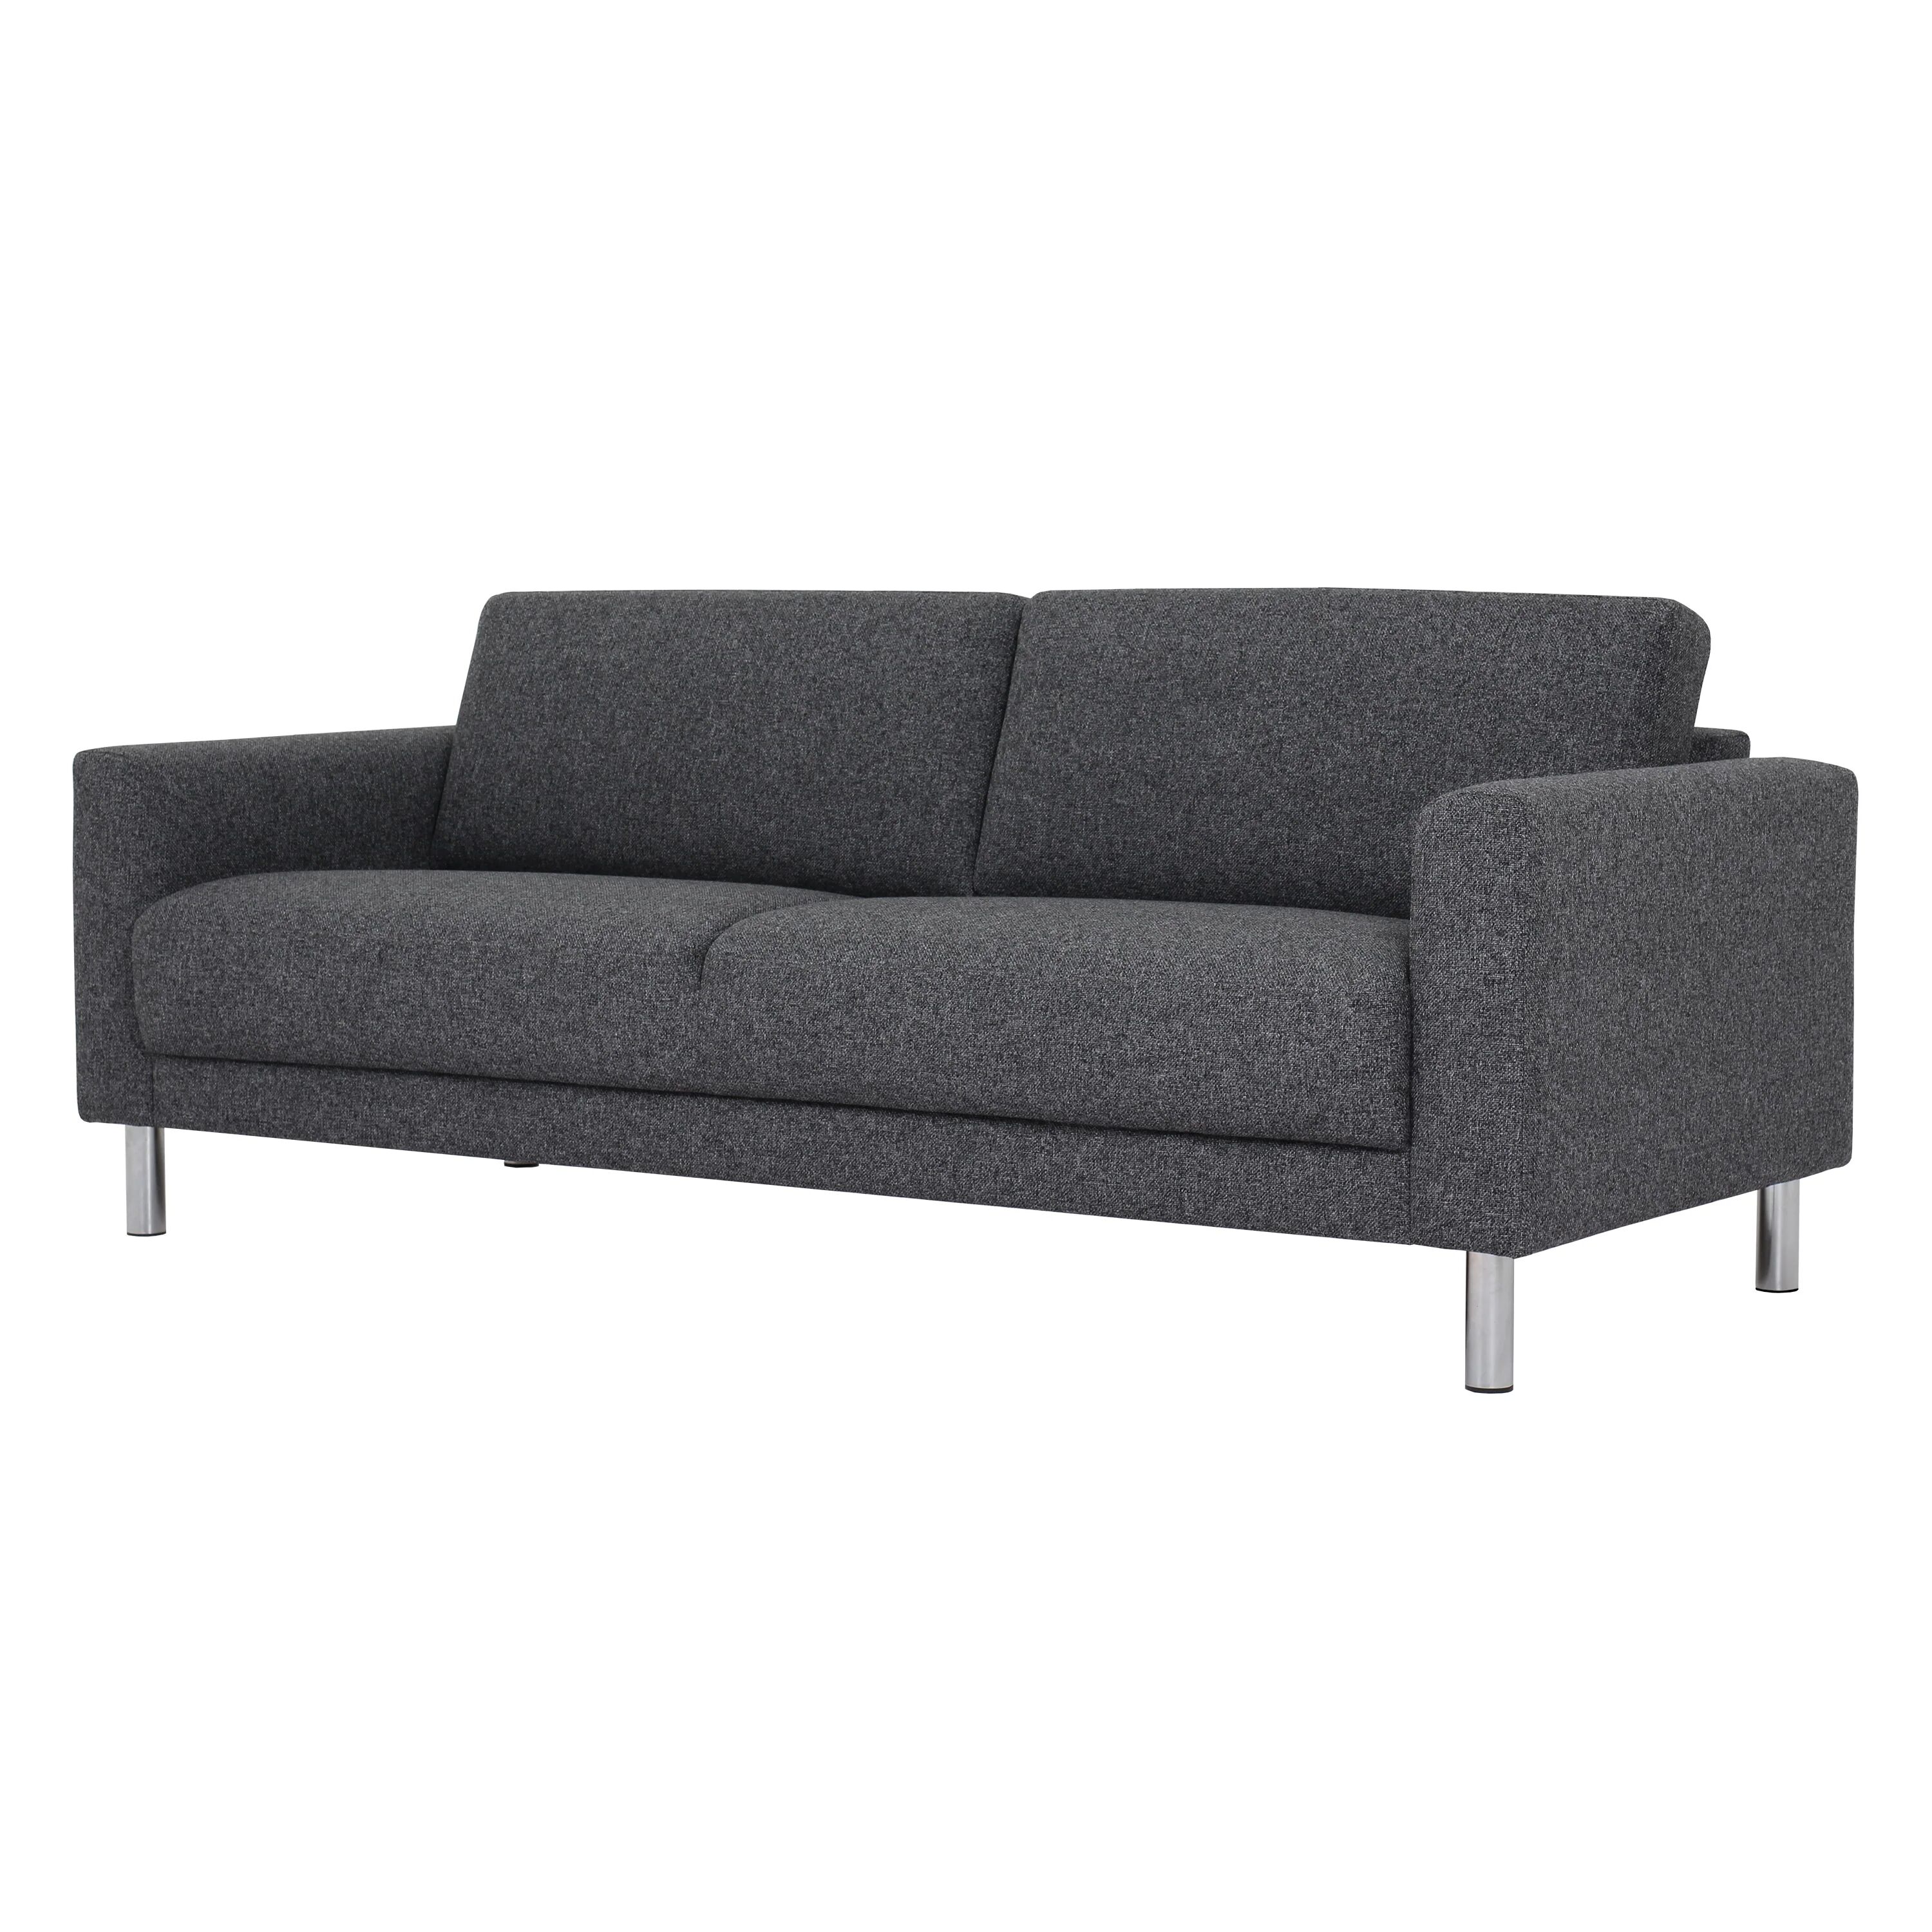 Furniture To Go Cleveland 3 Seater Sofa - Available In 2 Colours